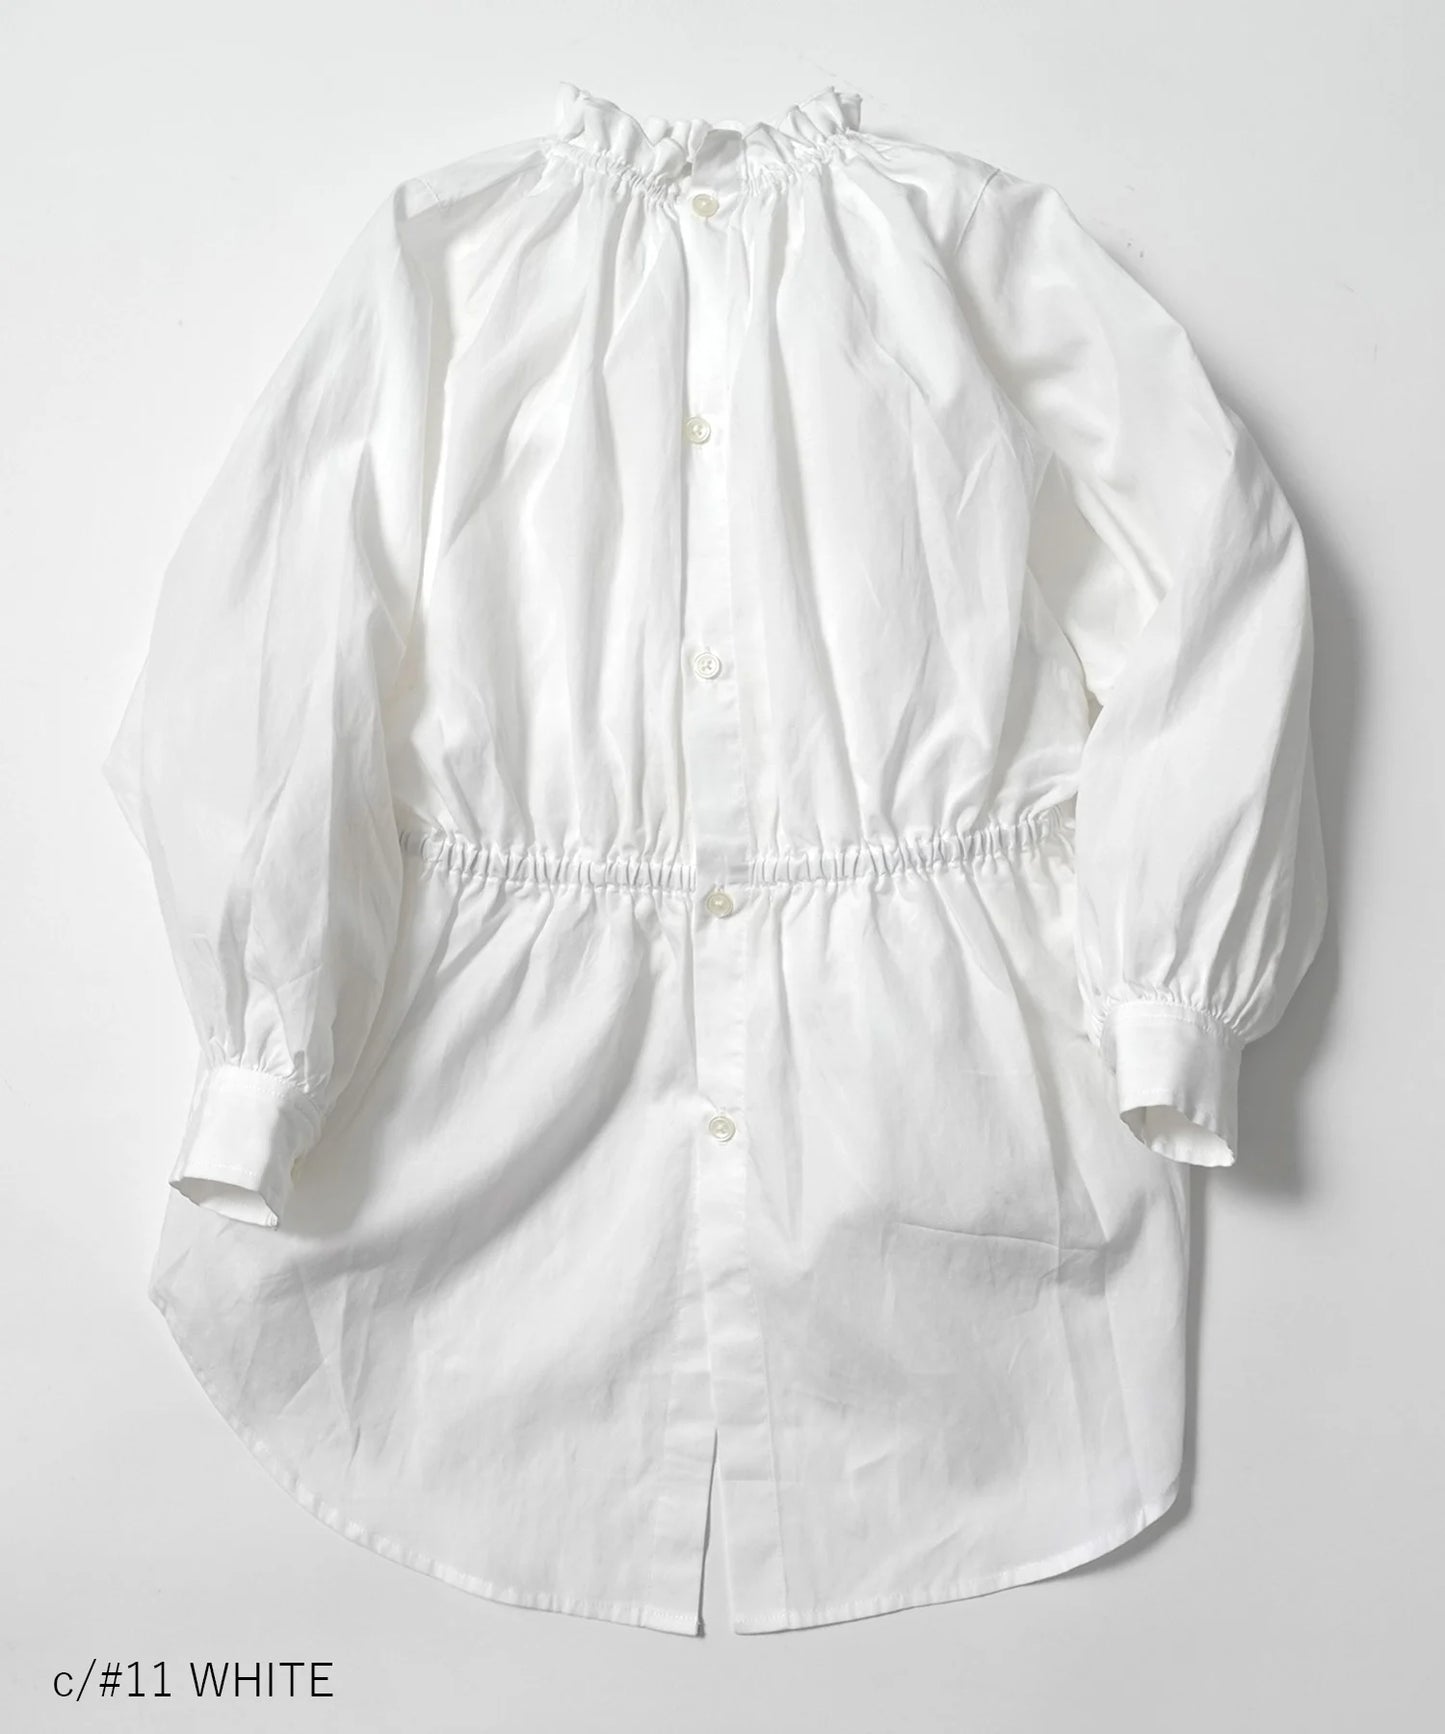 《Environmentally friendly material》2WAY FRILL BLOUSE For formal use, both on and off [145-165cm]